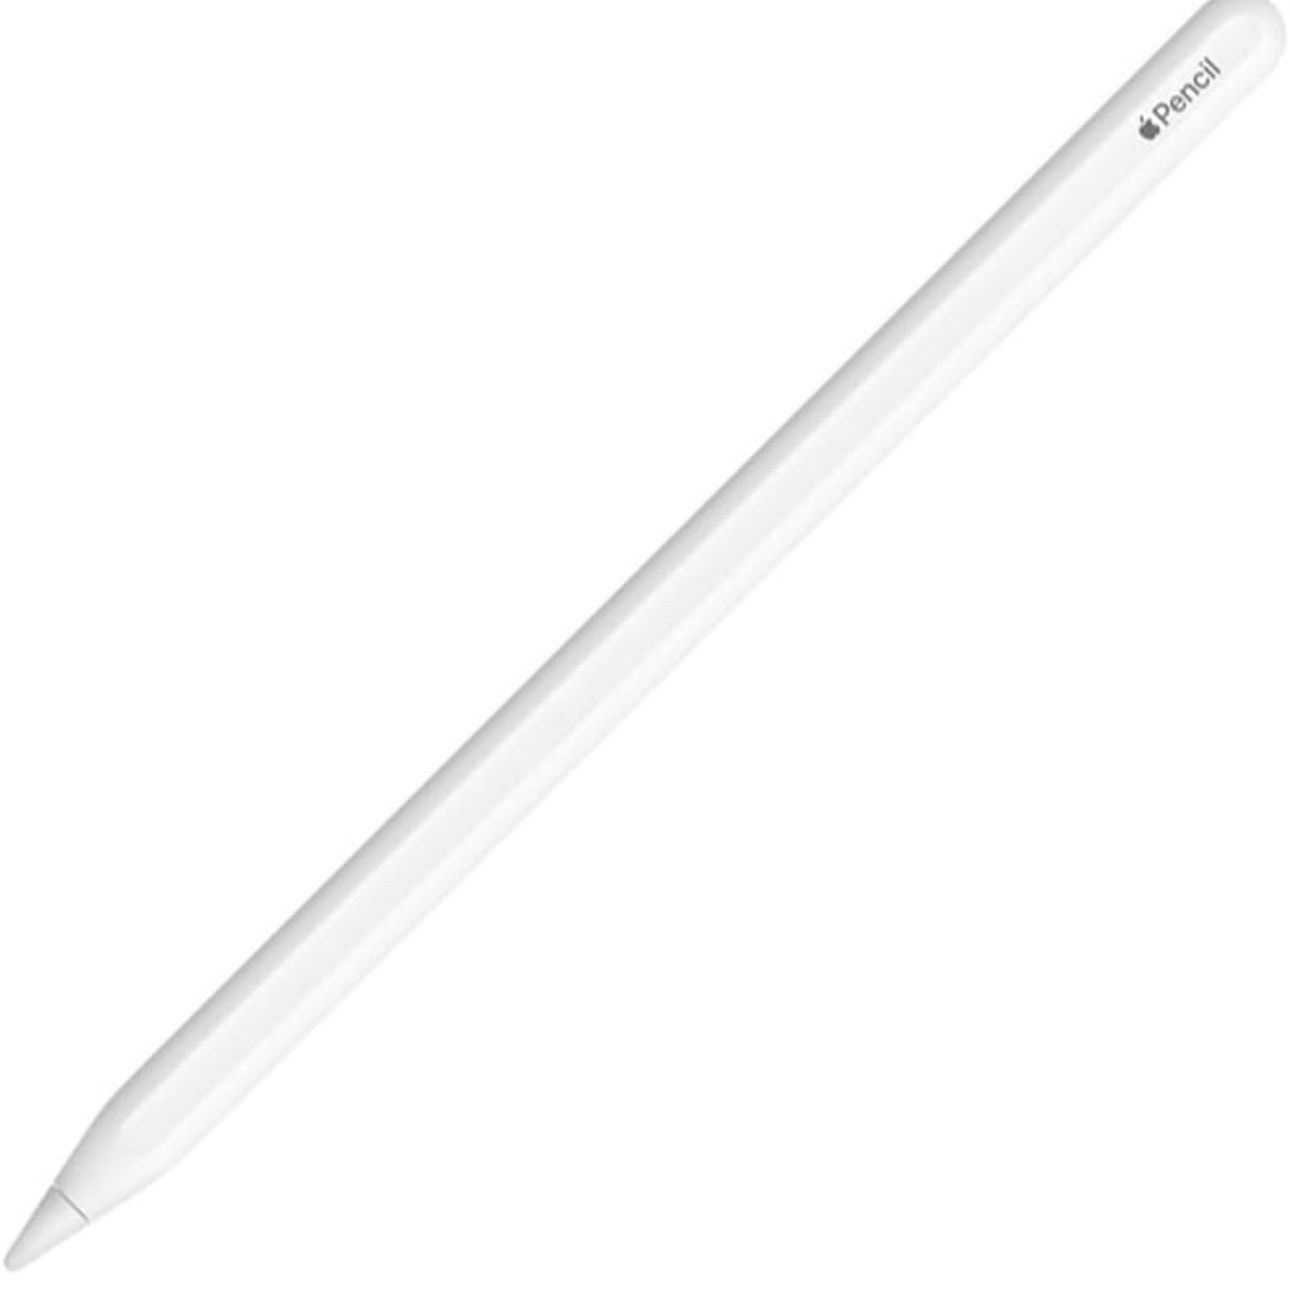 Apple Pencil Generation 2: Pixel Perfect Precision, Industry Leading Low Latency 